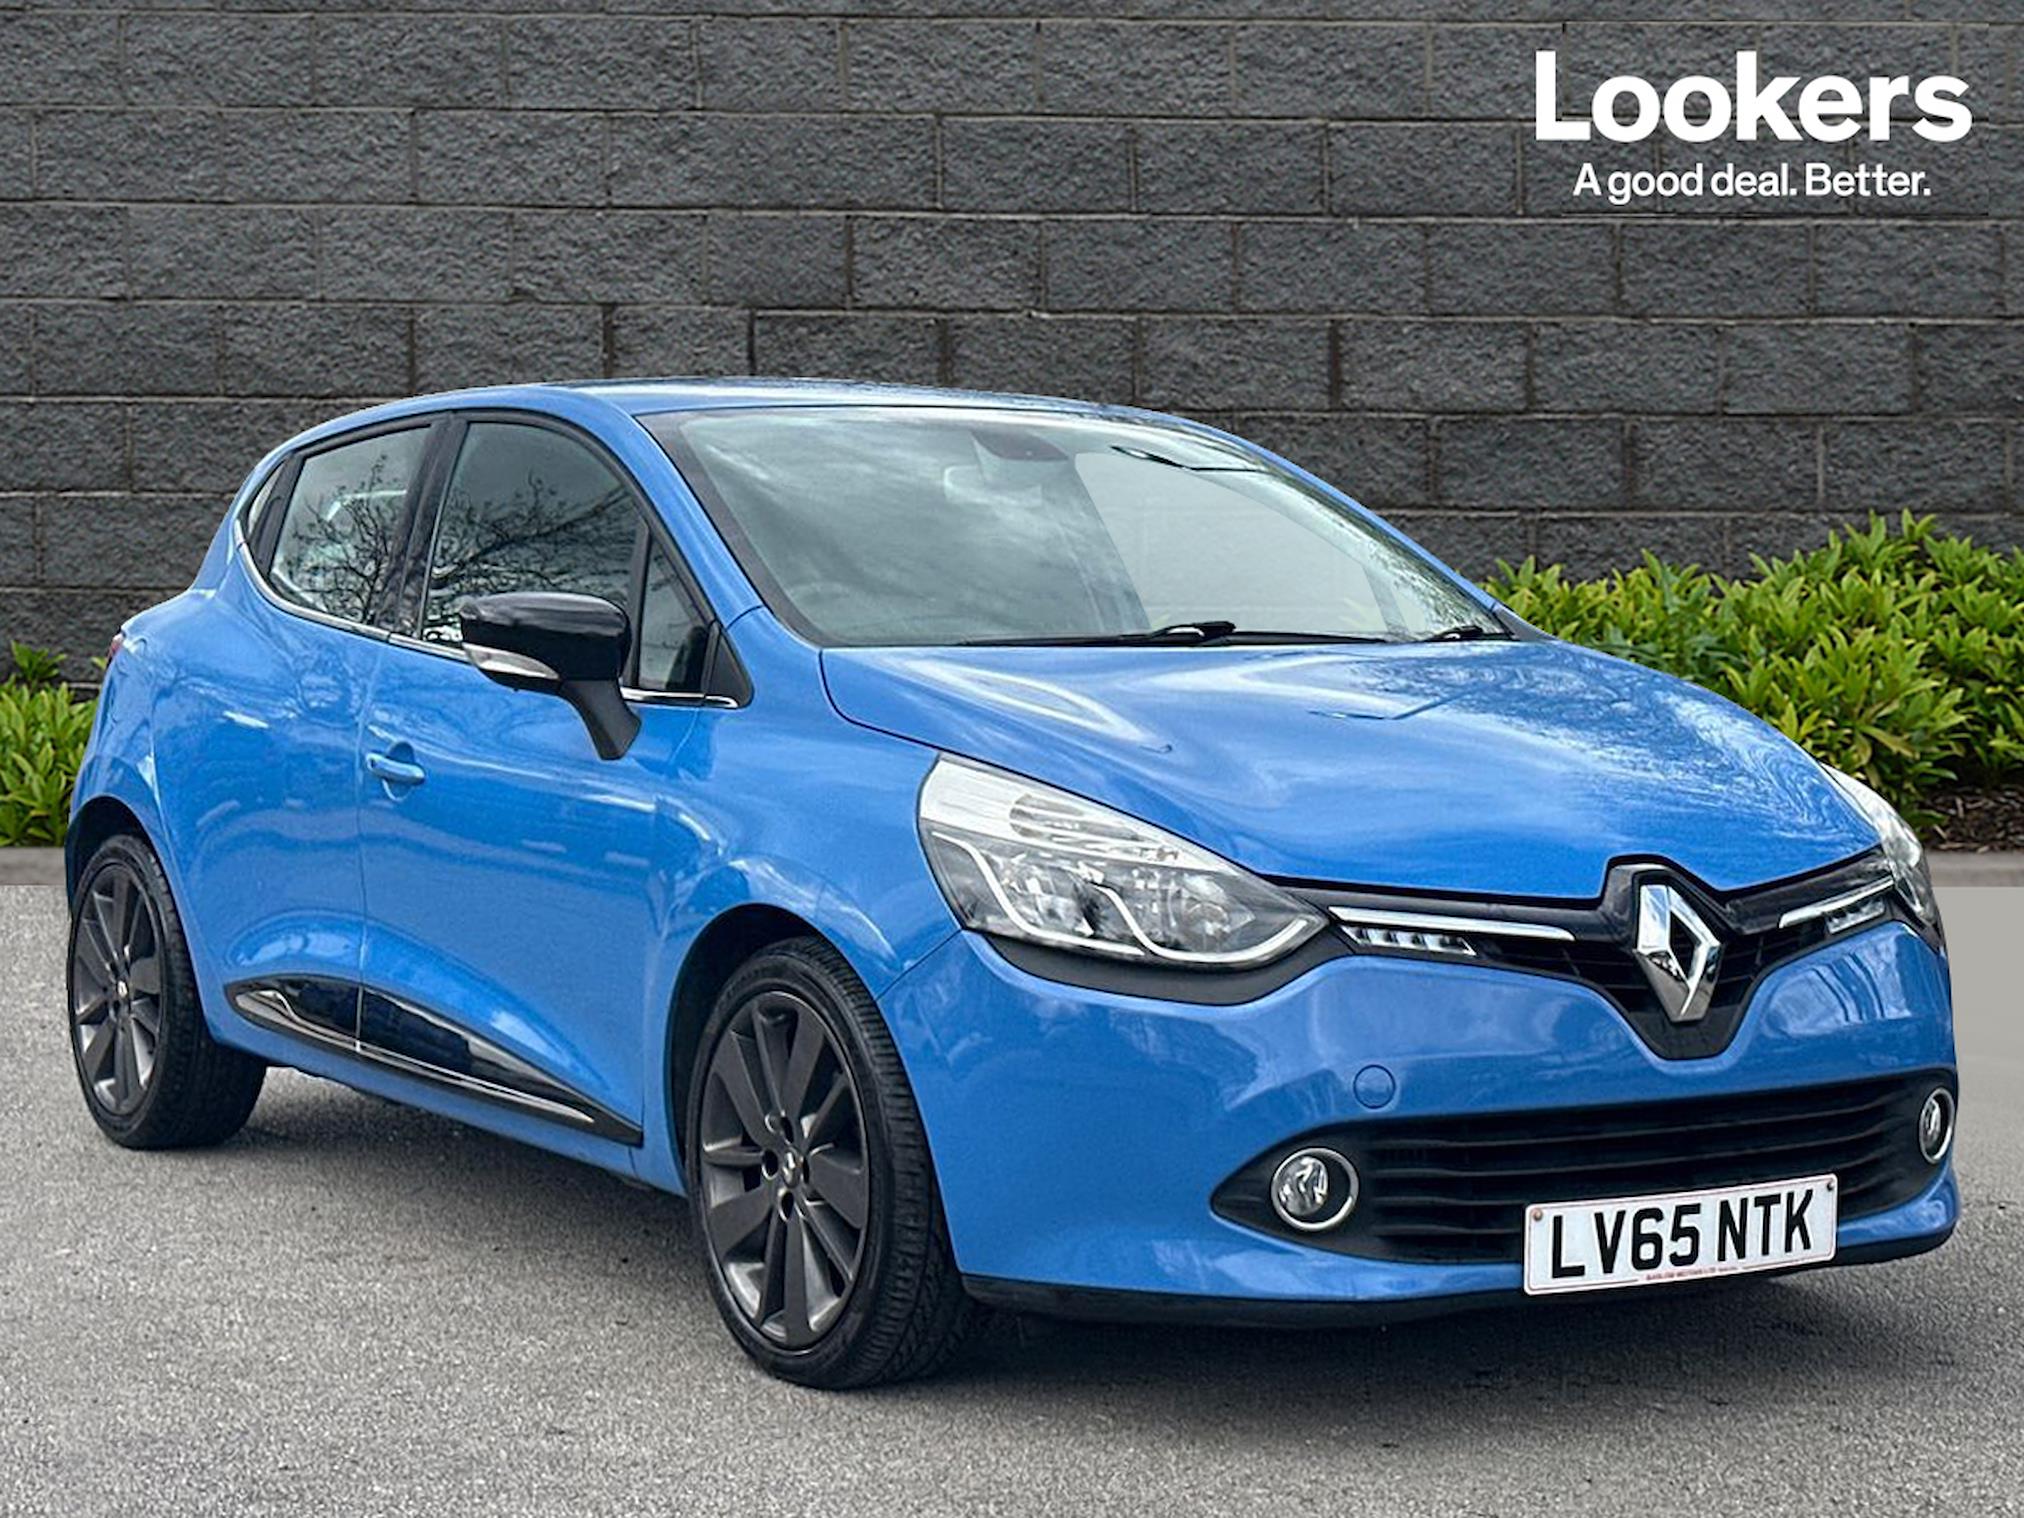 Used RENAULT CLIO 1.5 Dci 90 Dynamique S Nav 5Dr 2015